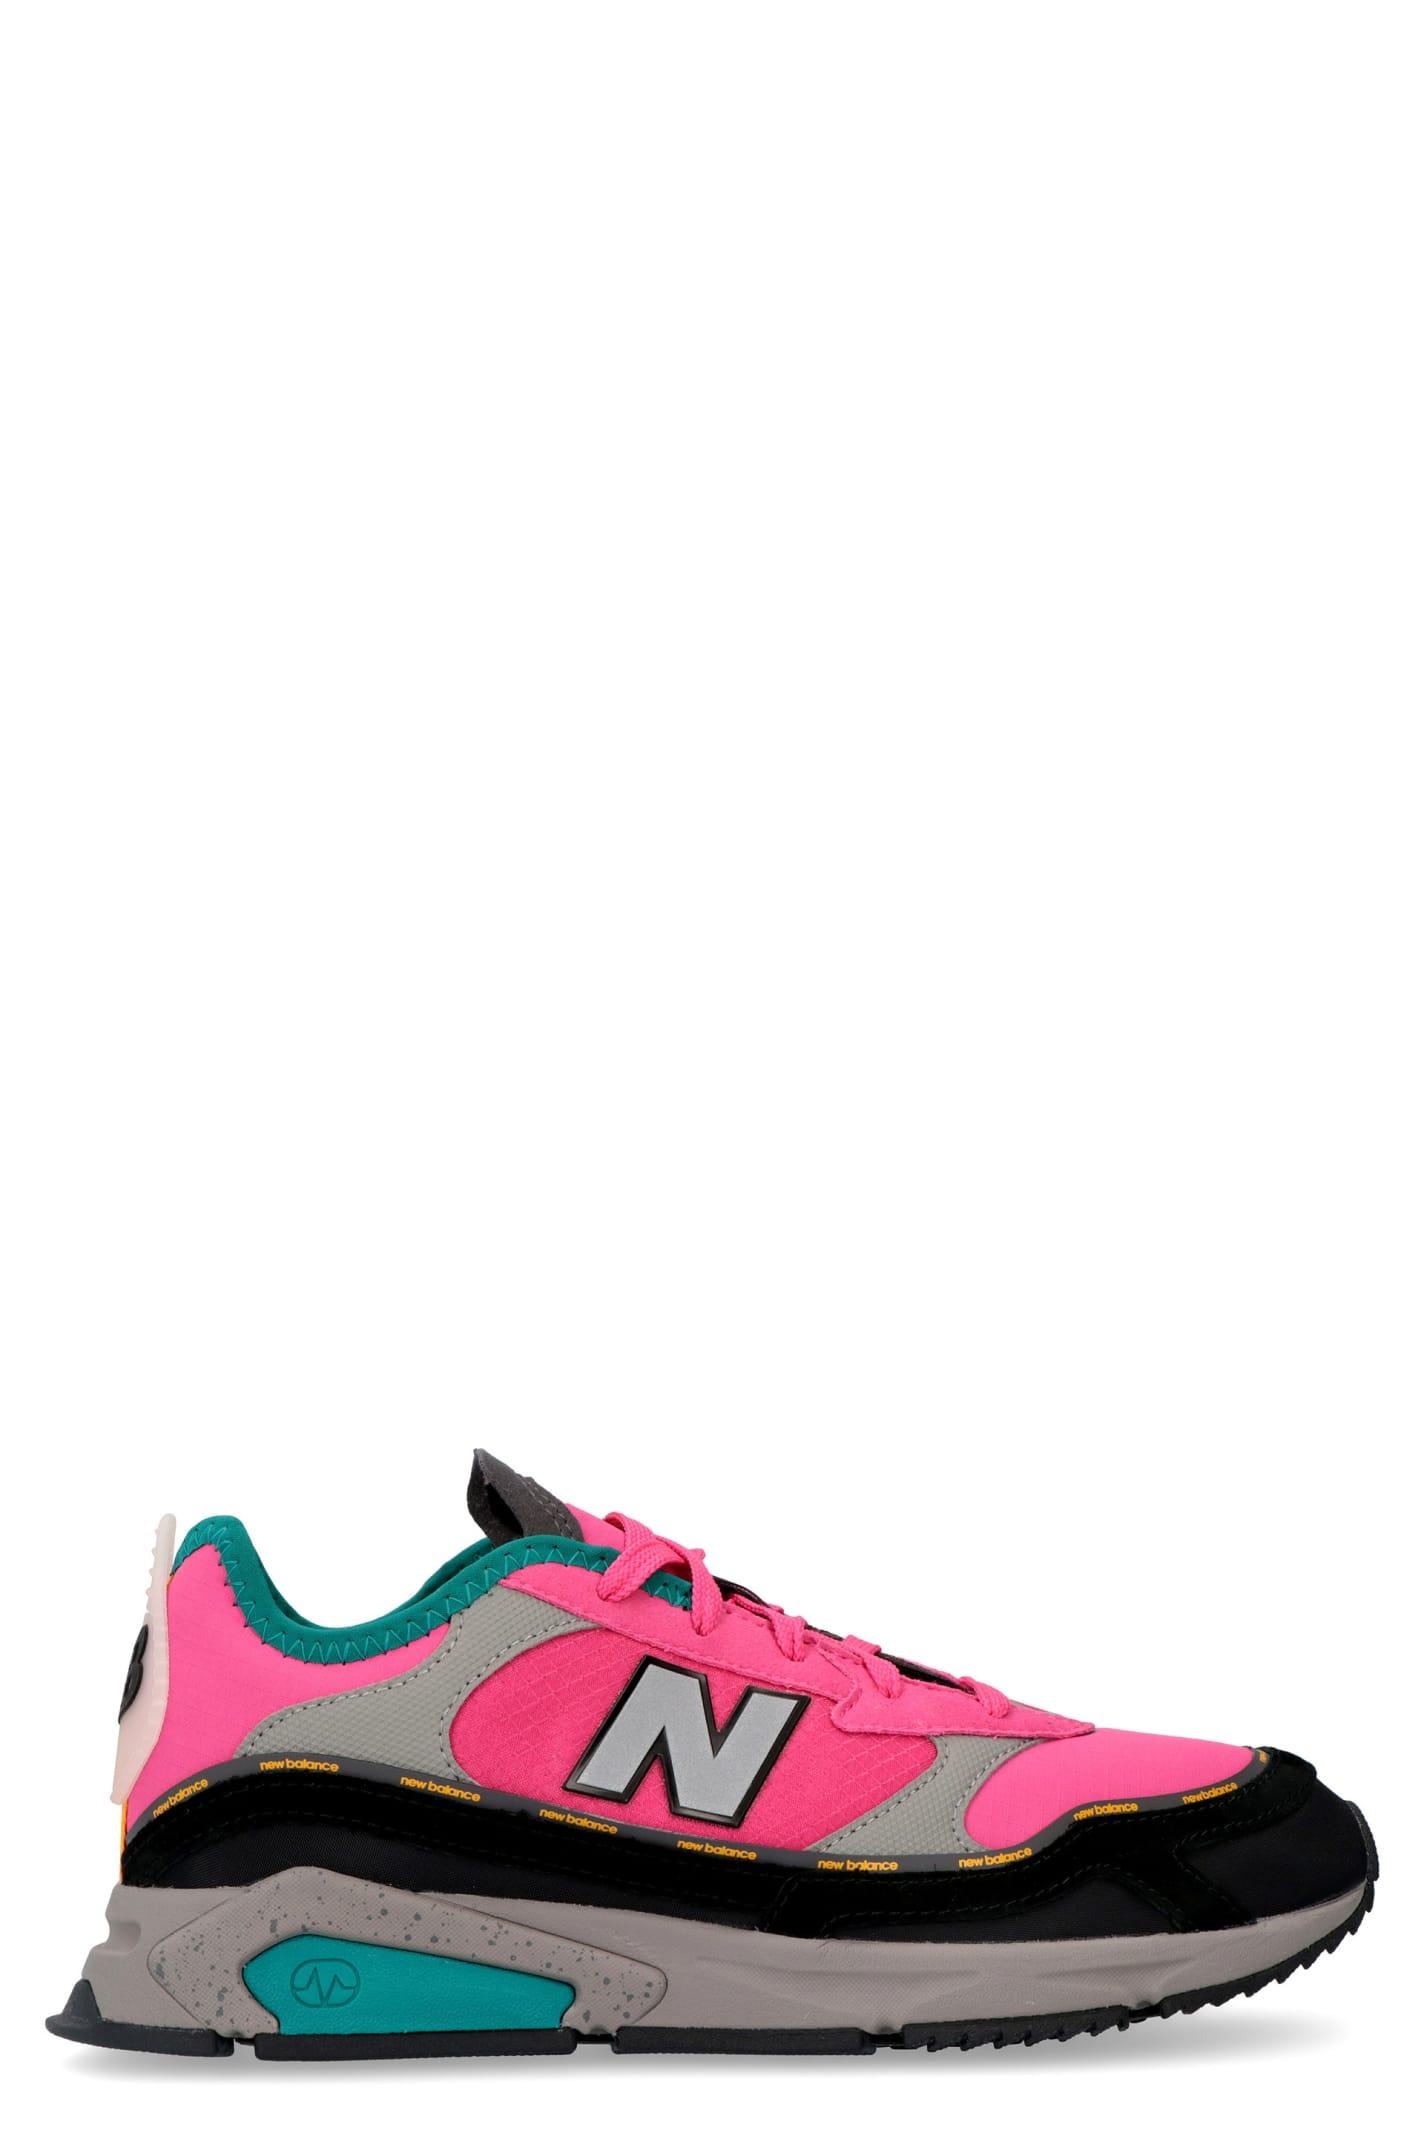 New Balance X-racer Low-top Sneakers in Fuchsia (Pink) - Save 39% | Lyst